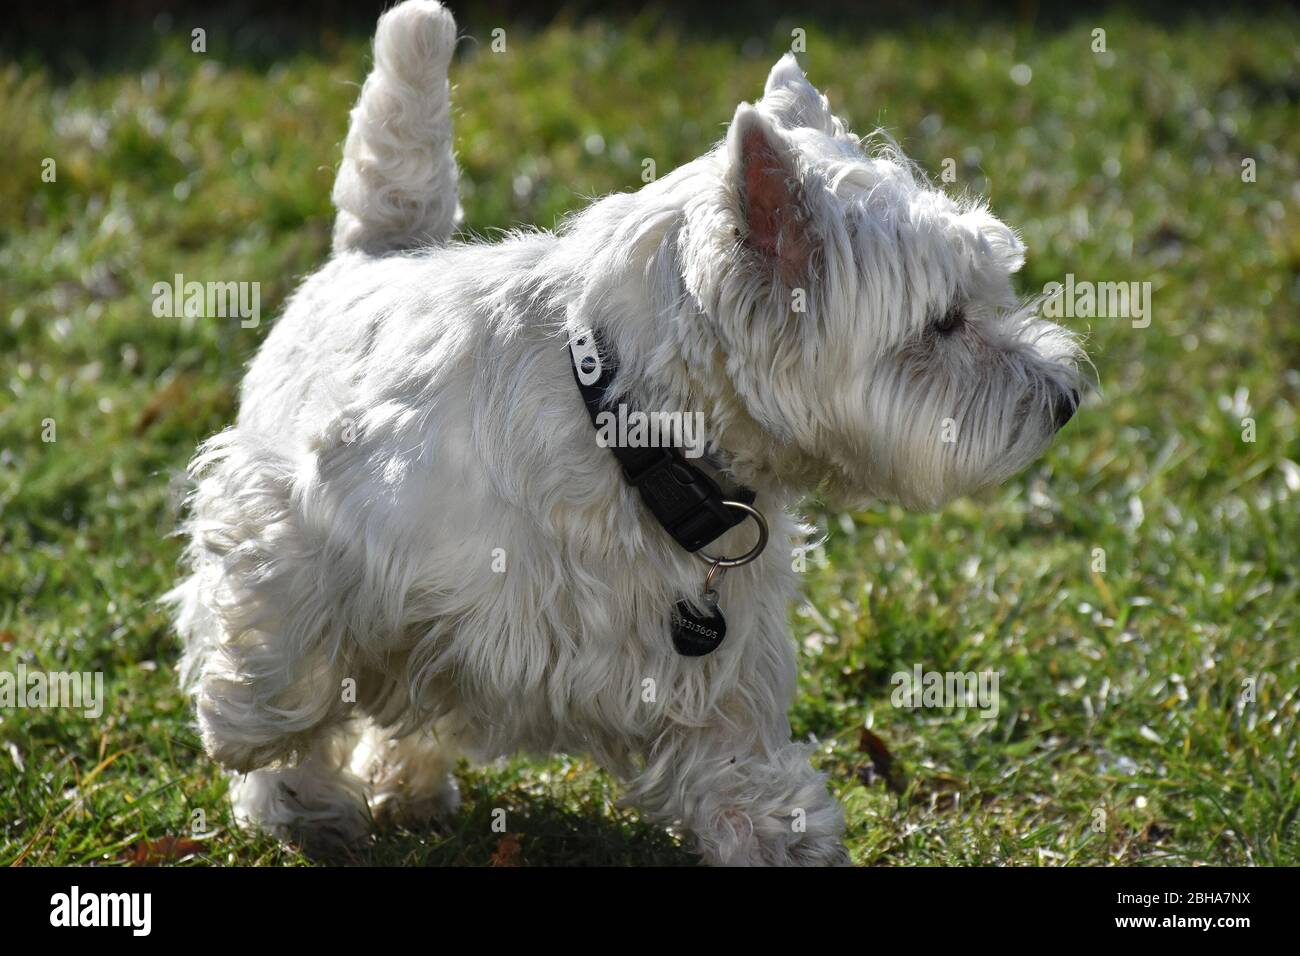 Portrait of a little white dog. Long white gray and glossy hair. Grass in the backgroun Stock Photo